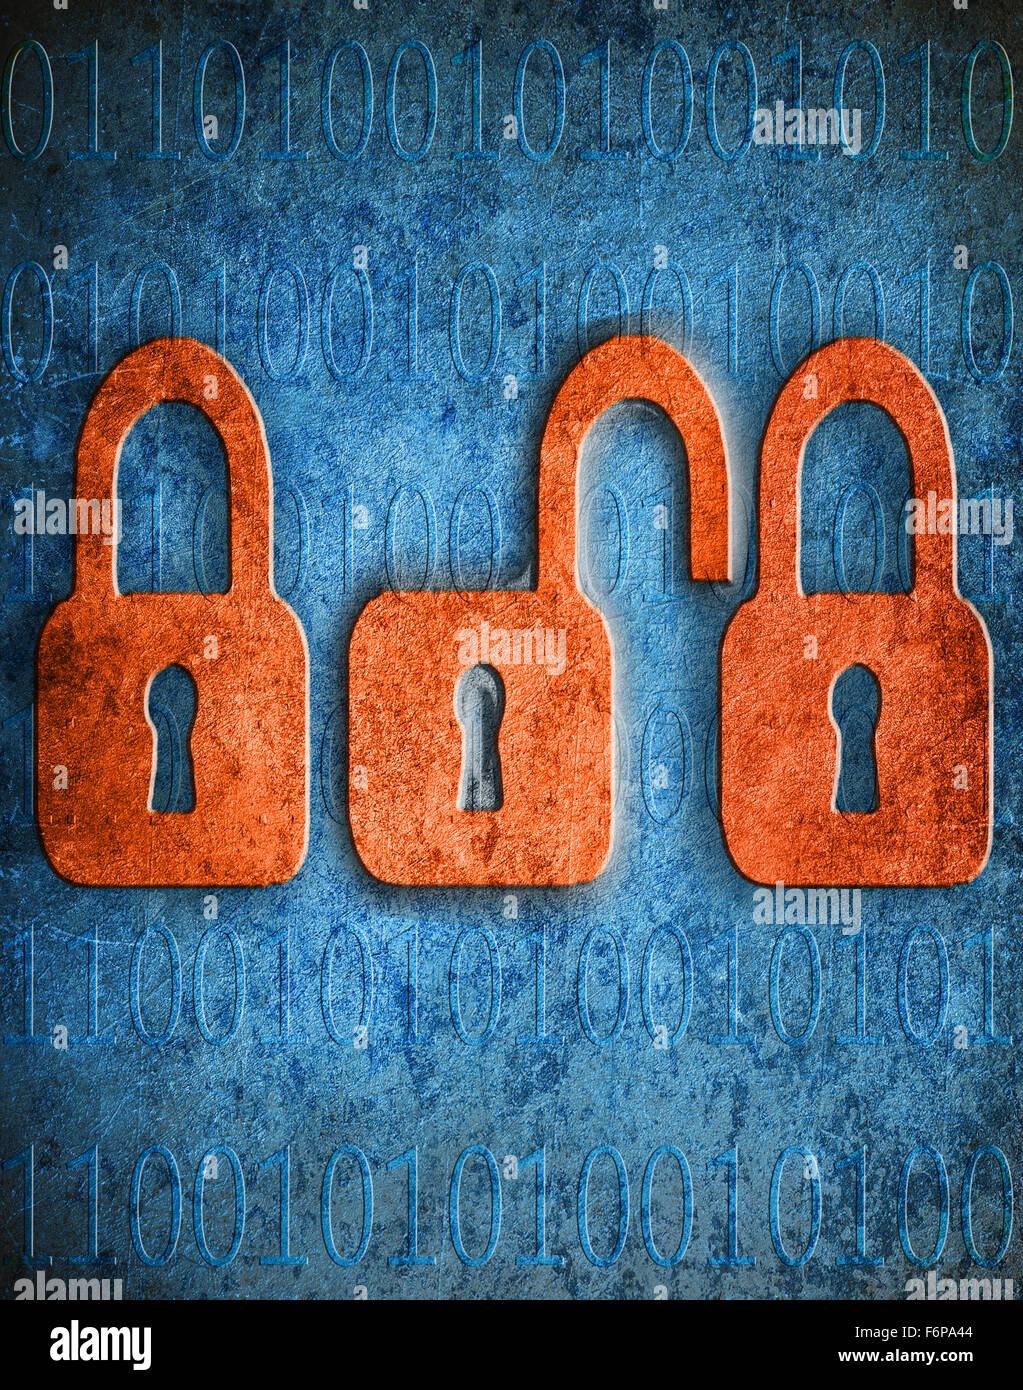 digital security digital illustration concept with padlocks and copy space Stock Photo